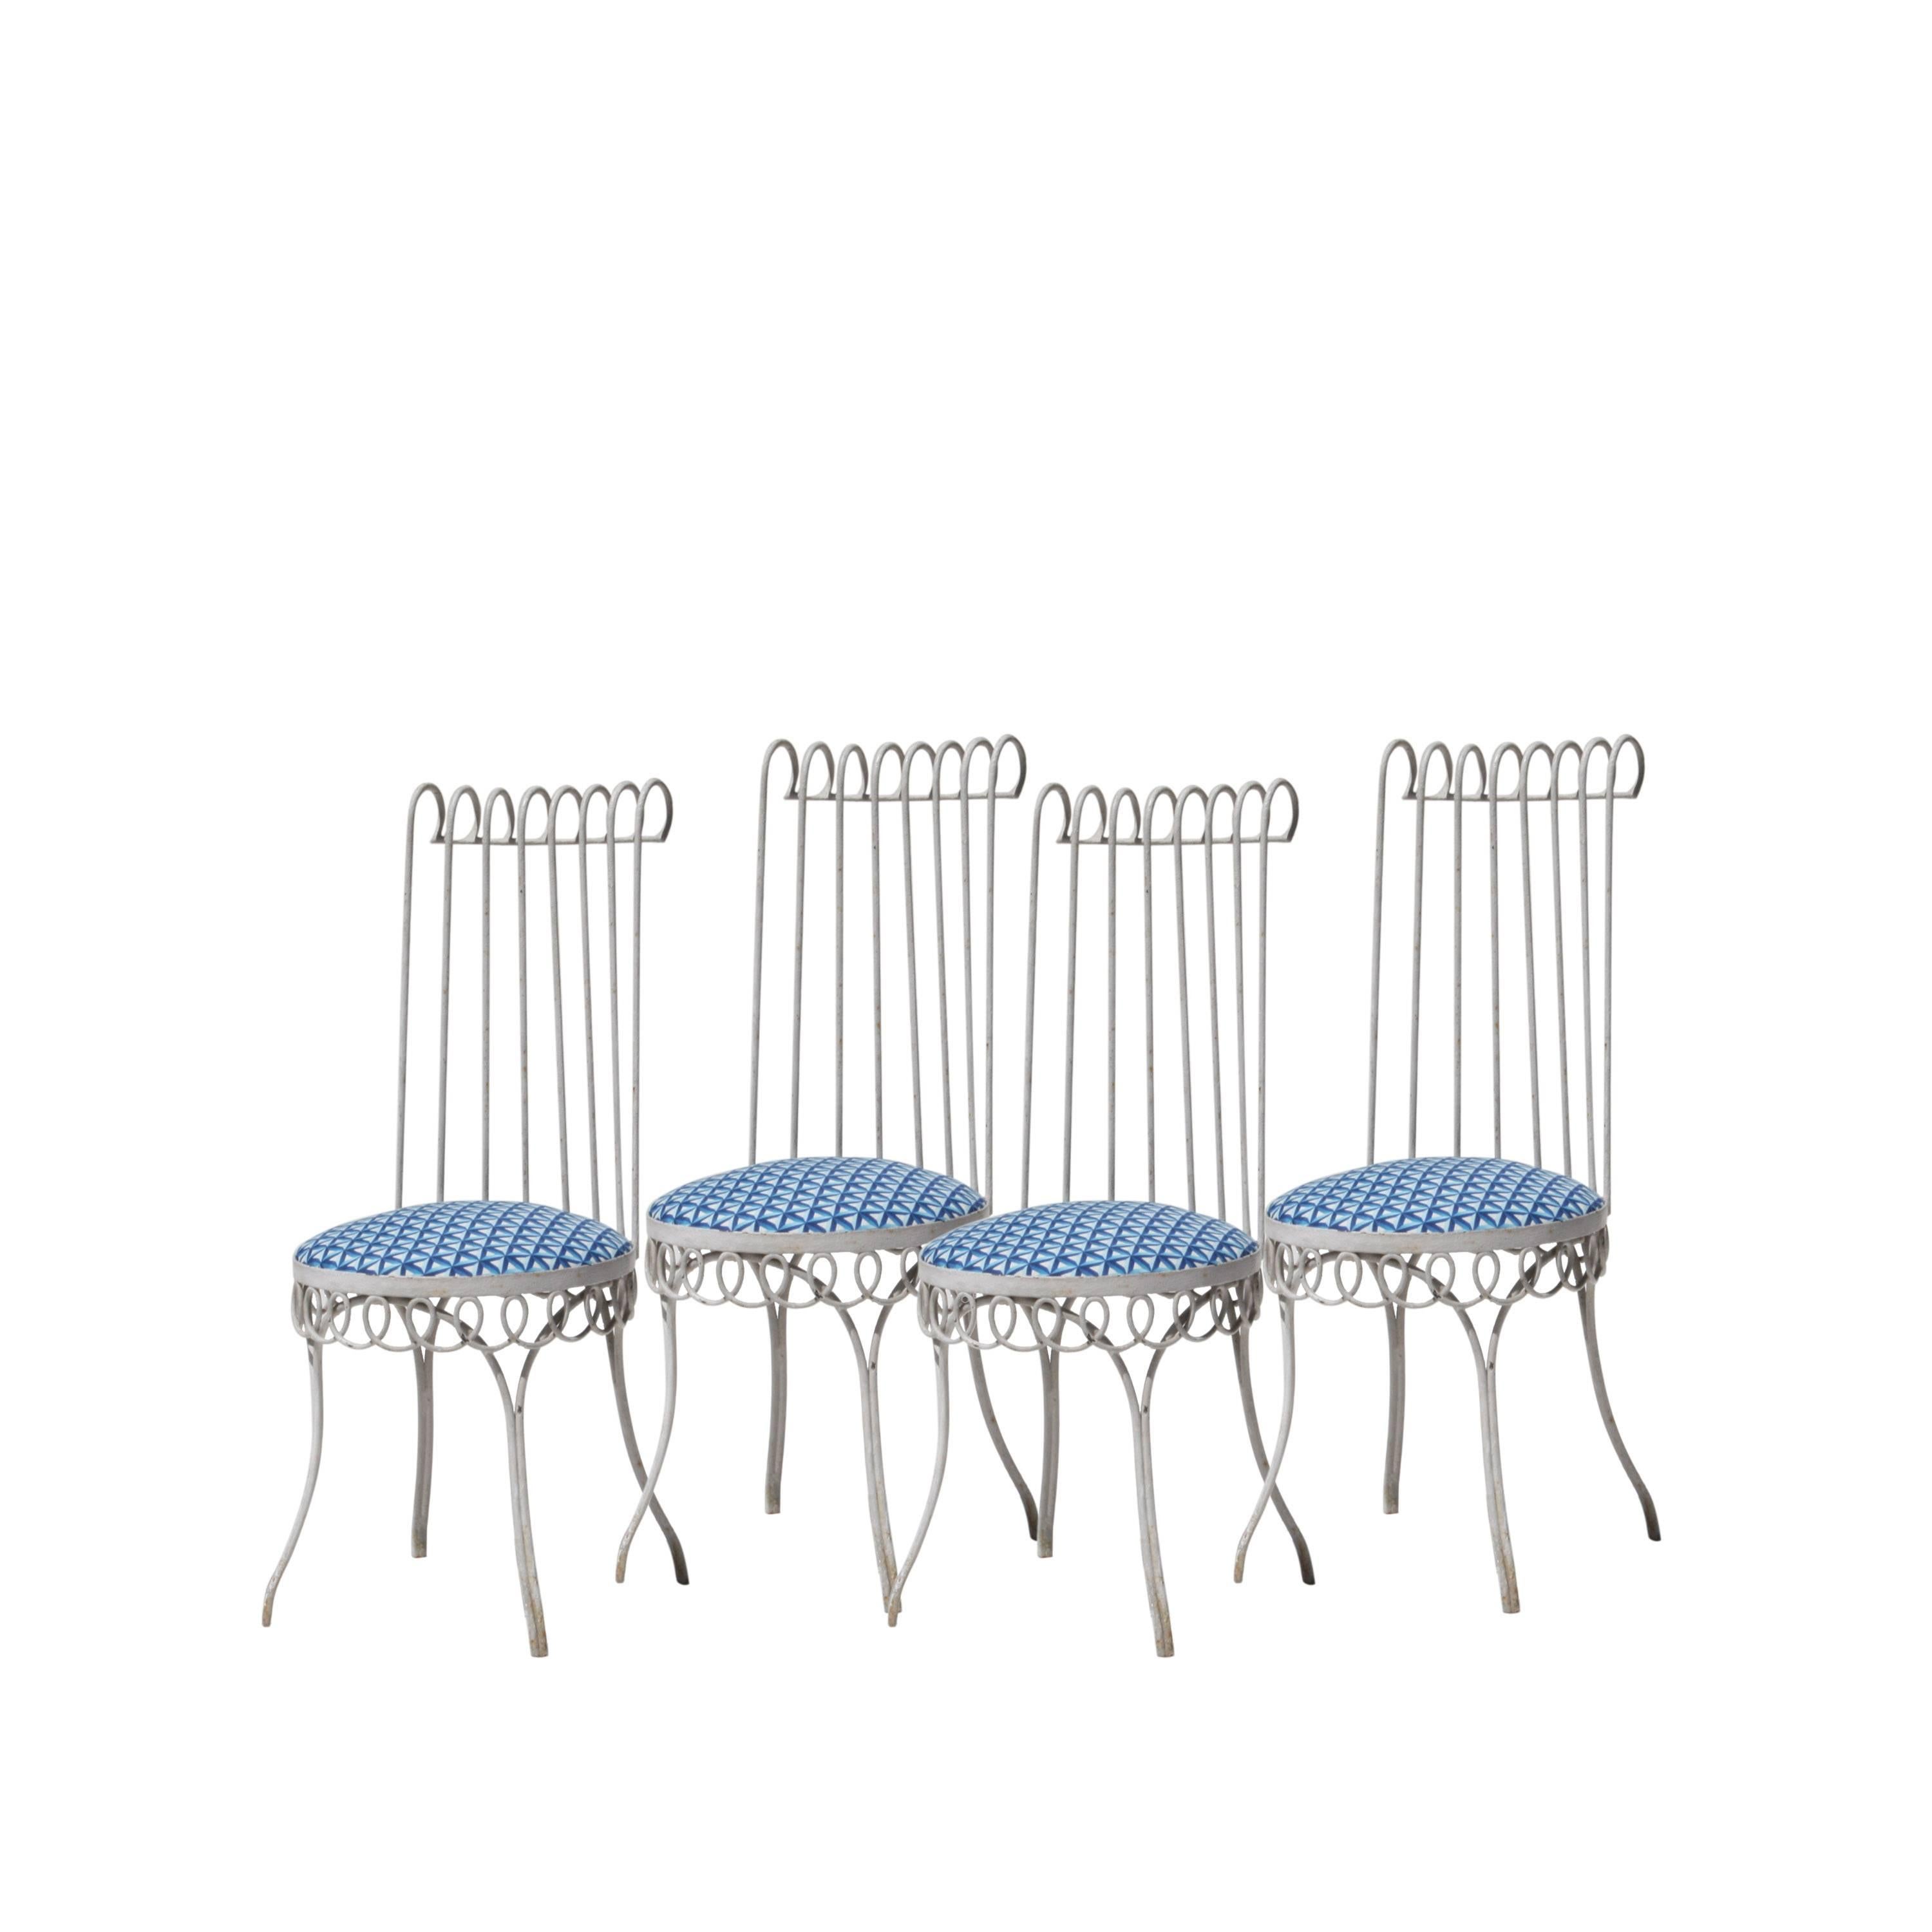 Mid-20th Century Mathieu Matégot Mid-Century Modern Set of Four Chairs, France, 1950 For Sale